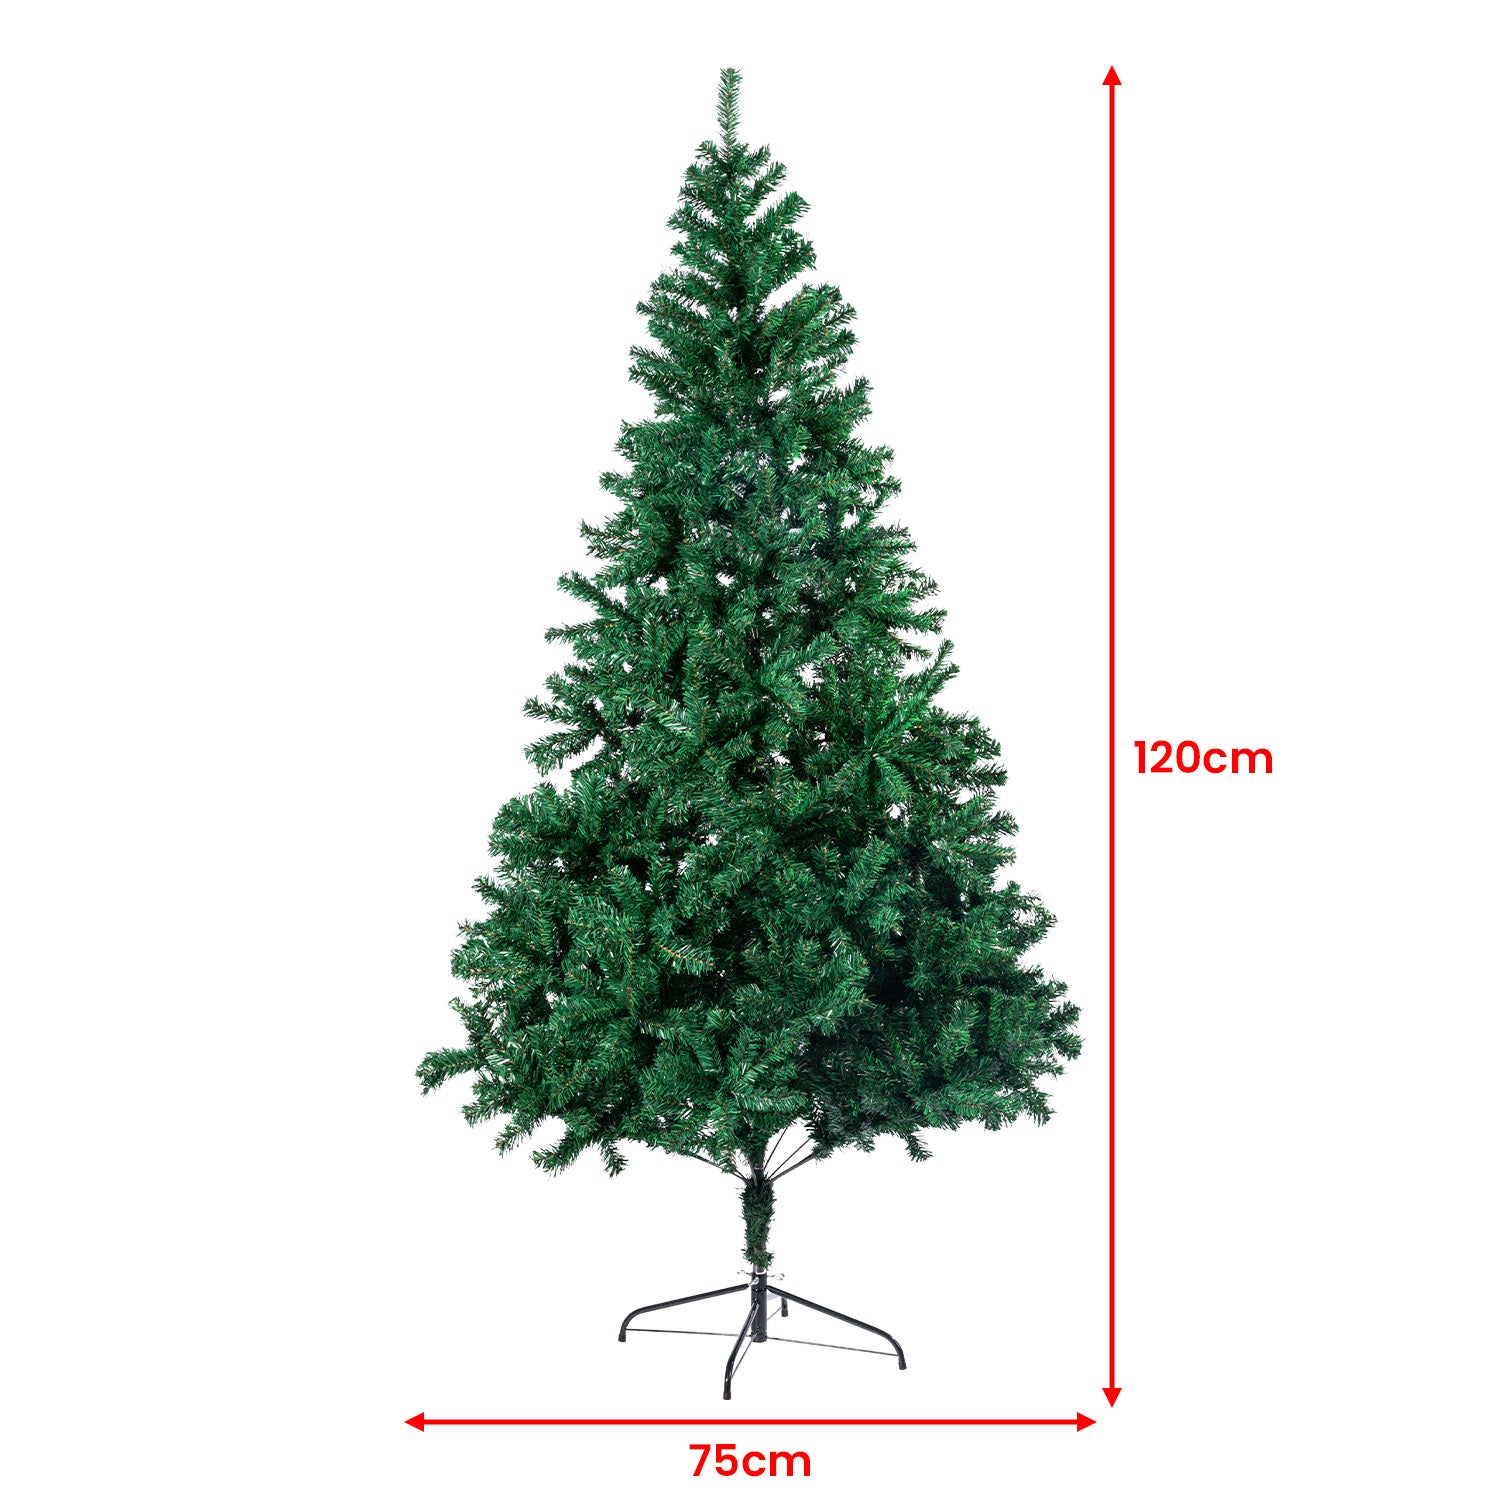 Christabelle Christmas Tree Decor 1.2m Xmas Decorations - 300 Tips Green - SILBERSHELL